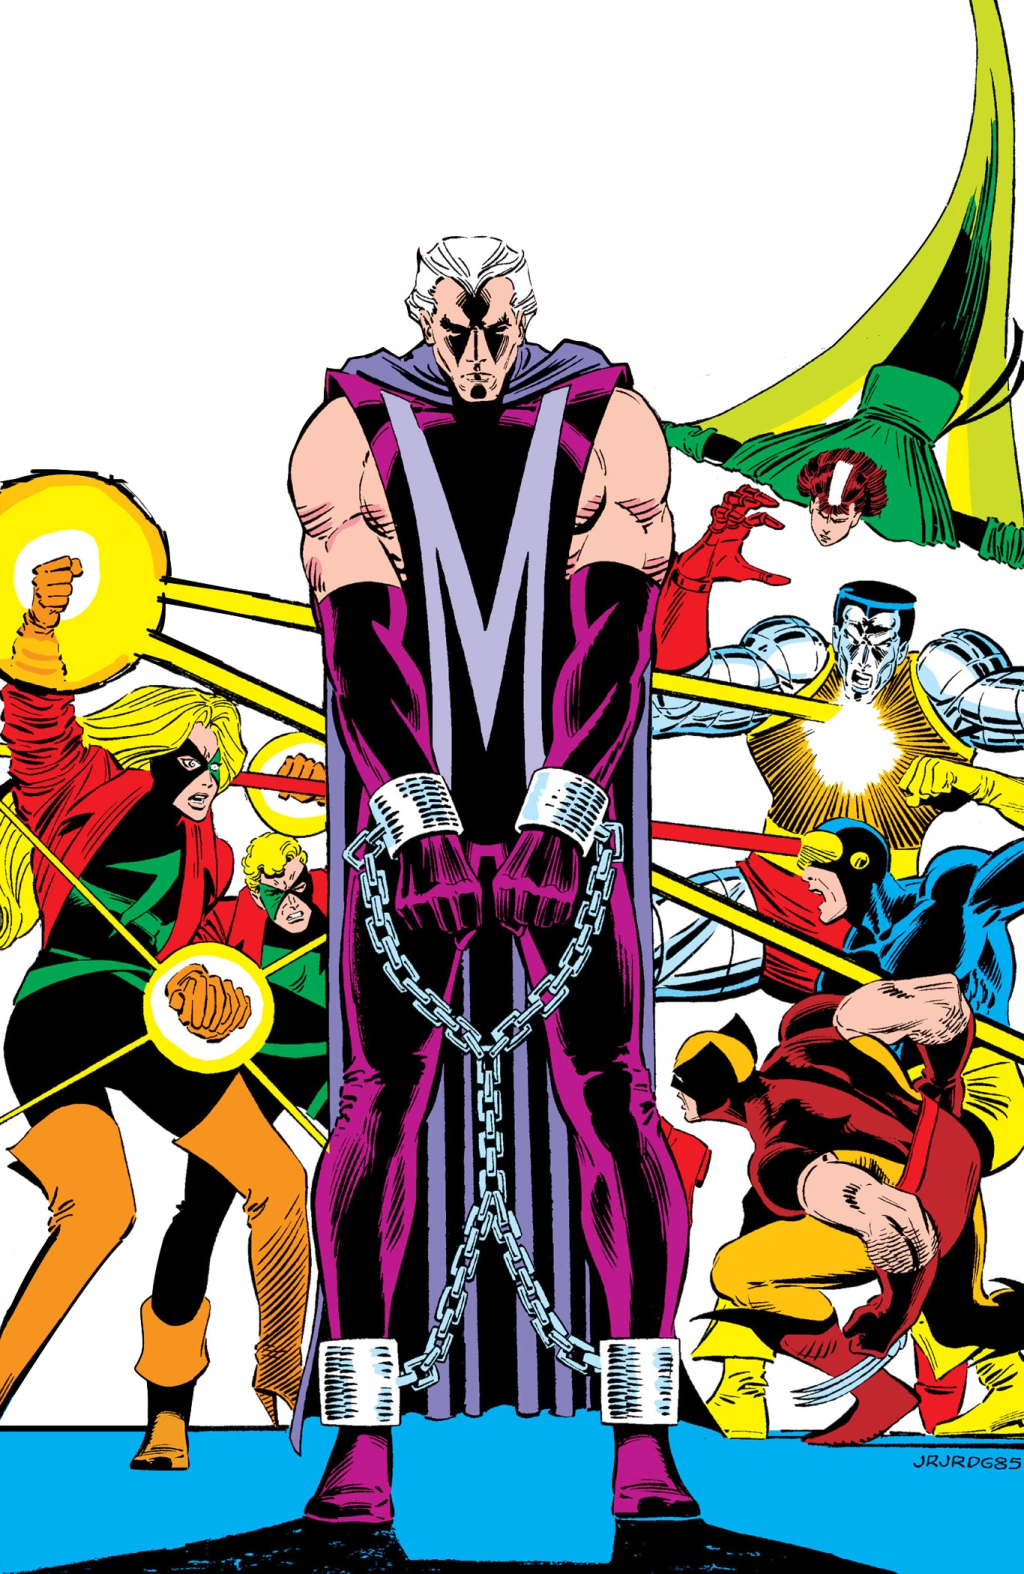 The Master of Magnetism is brought before the courts on John Romita Jr., Dan Green and Ron Zalme's cover to Uncanny X-Men Vol. 1 #200 "The Trial of Magneto!" (1985), Marvel Comics